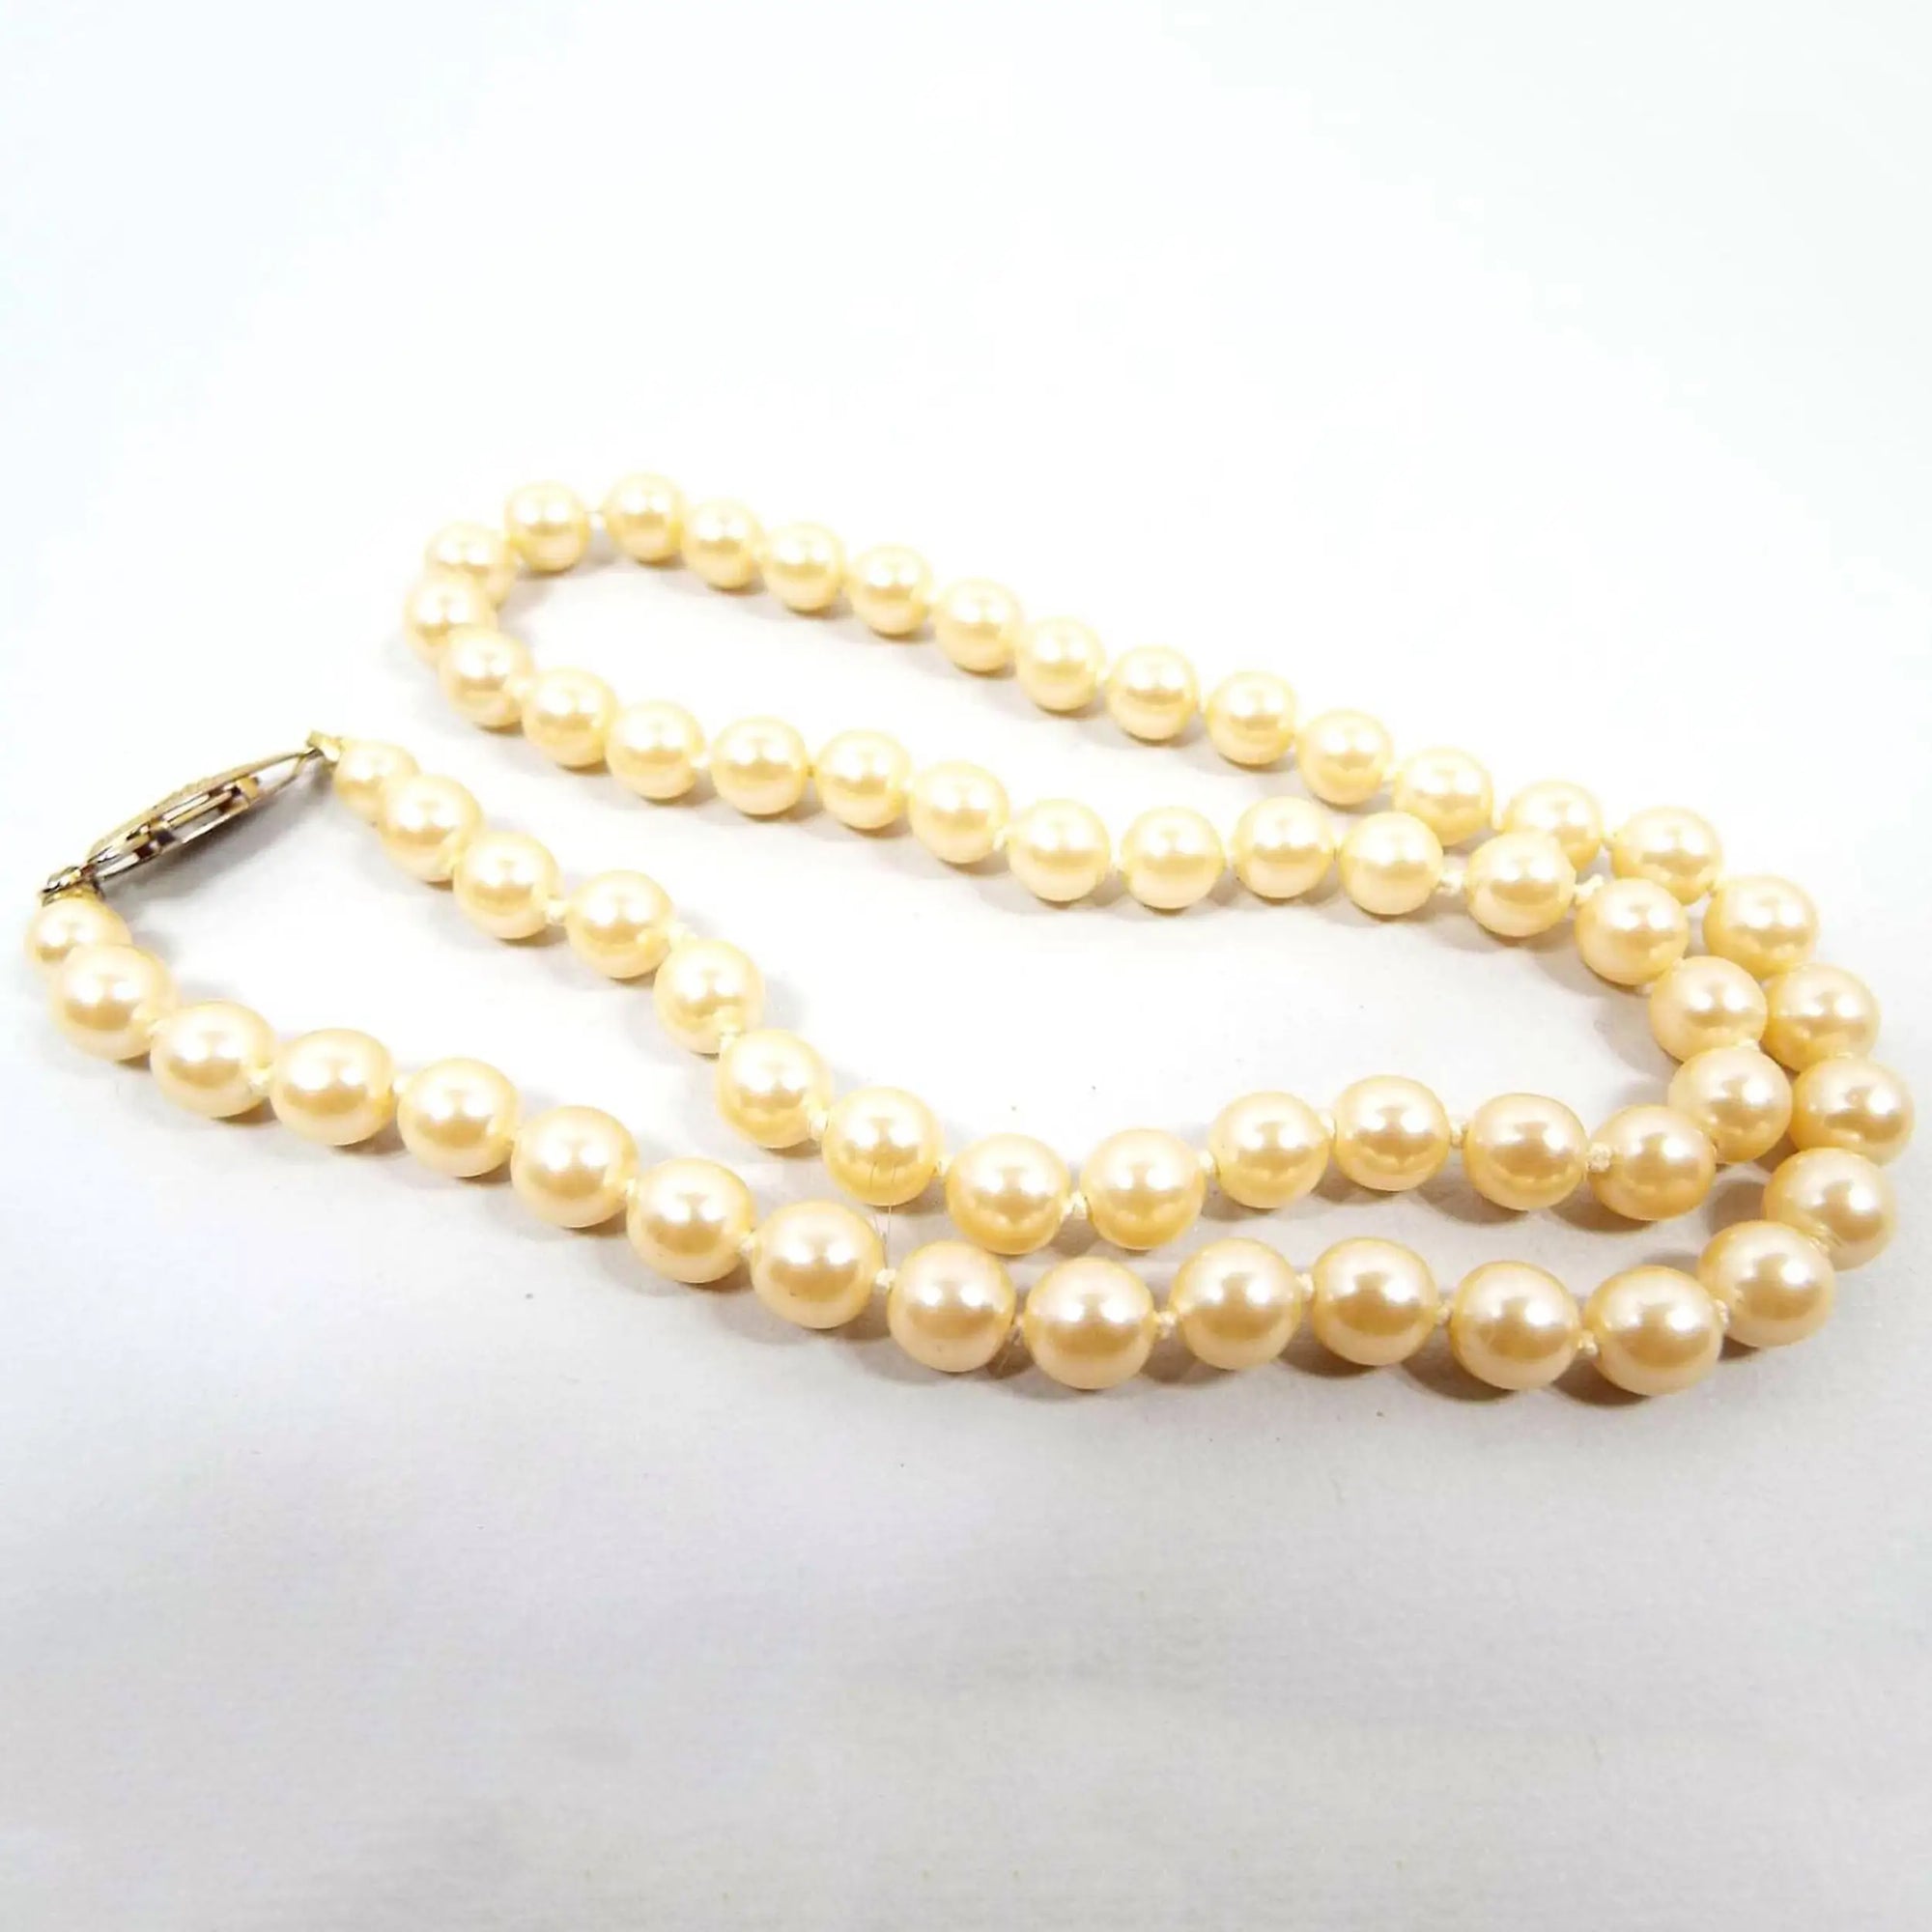 Angled view of the Mid Century vintage faux pearl beaded necklace. The glass imitation pearls are a golden off white in color. There is a gold tone plated slide clasp at the end.